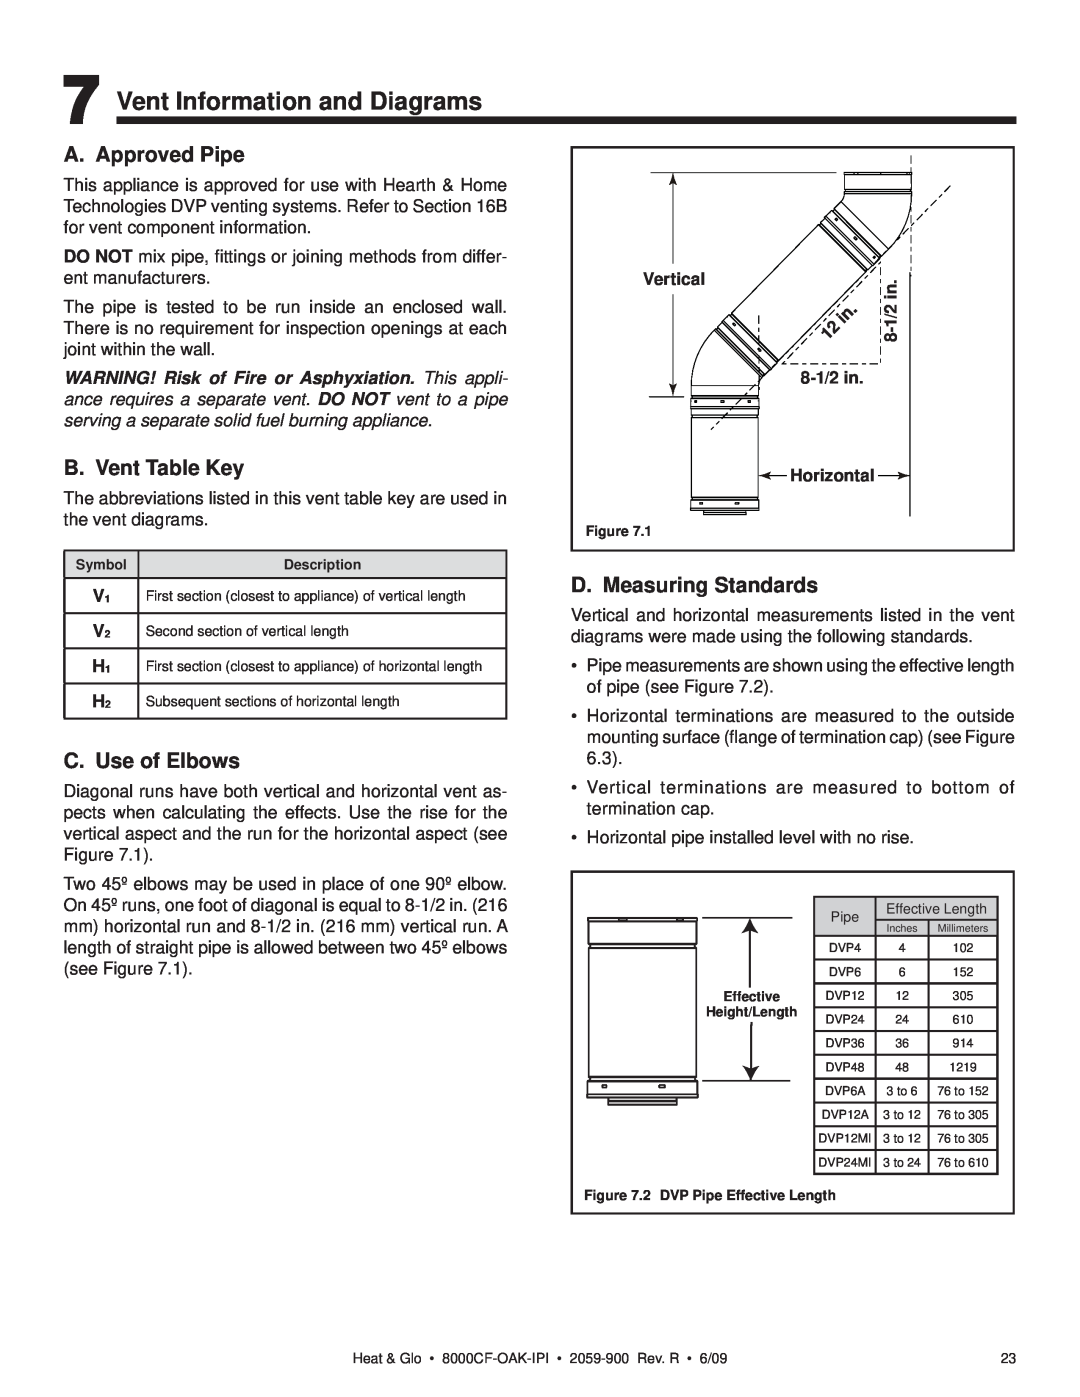 Heat & Glo LifeStyle 8000CF-OAK-IPI Vent Information and Diagrams, A. Approved Pipe, B. Vent Table Key, C. Use of Elbows 